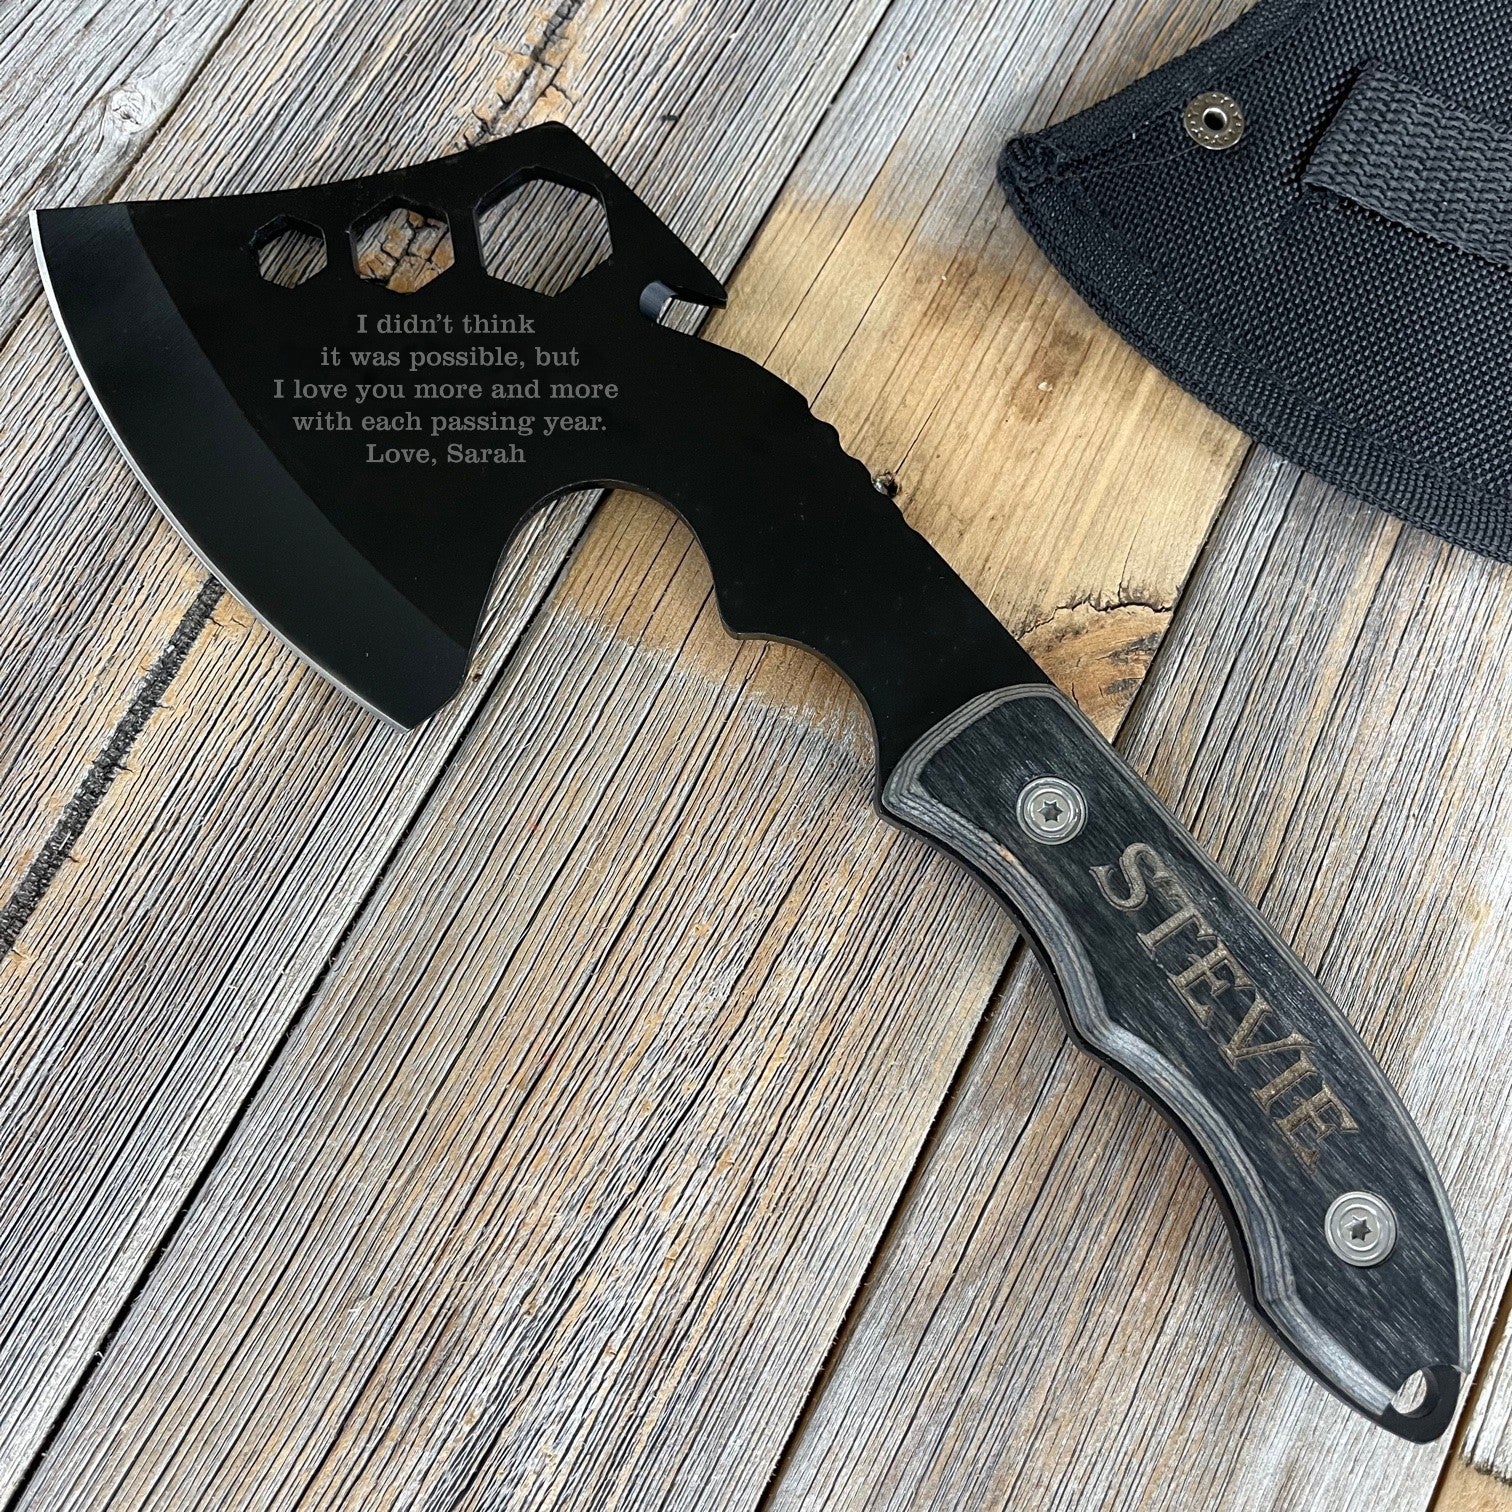 Custom Engraved Message on Anniversary Gift- Axe of Love